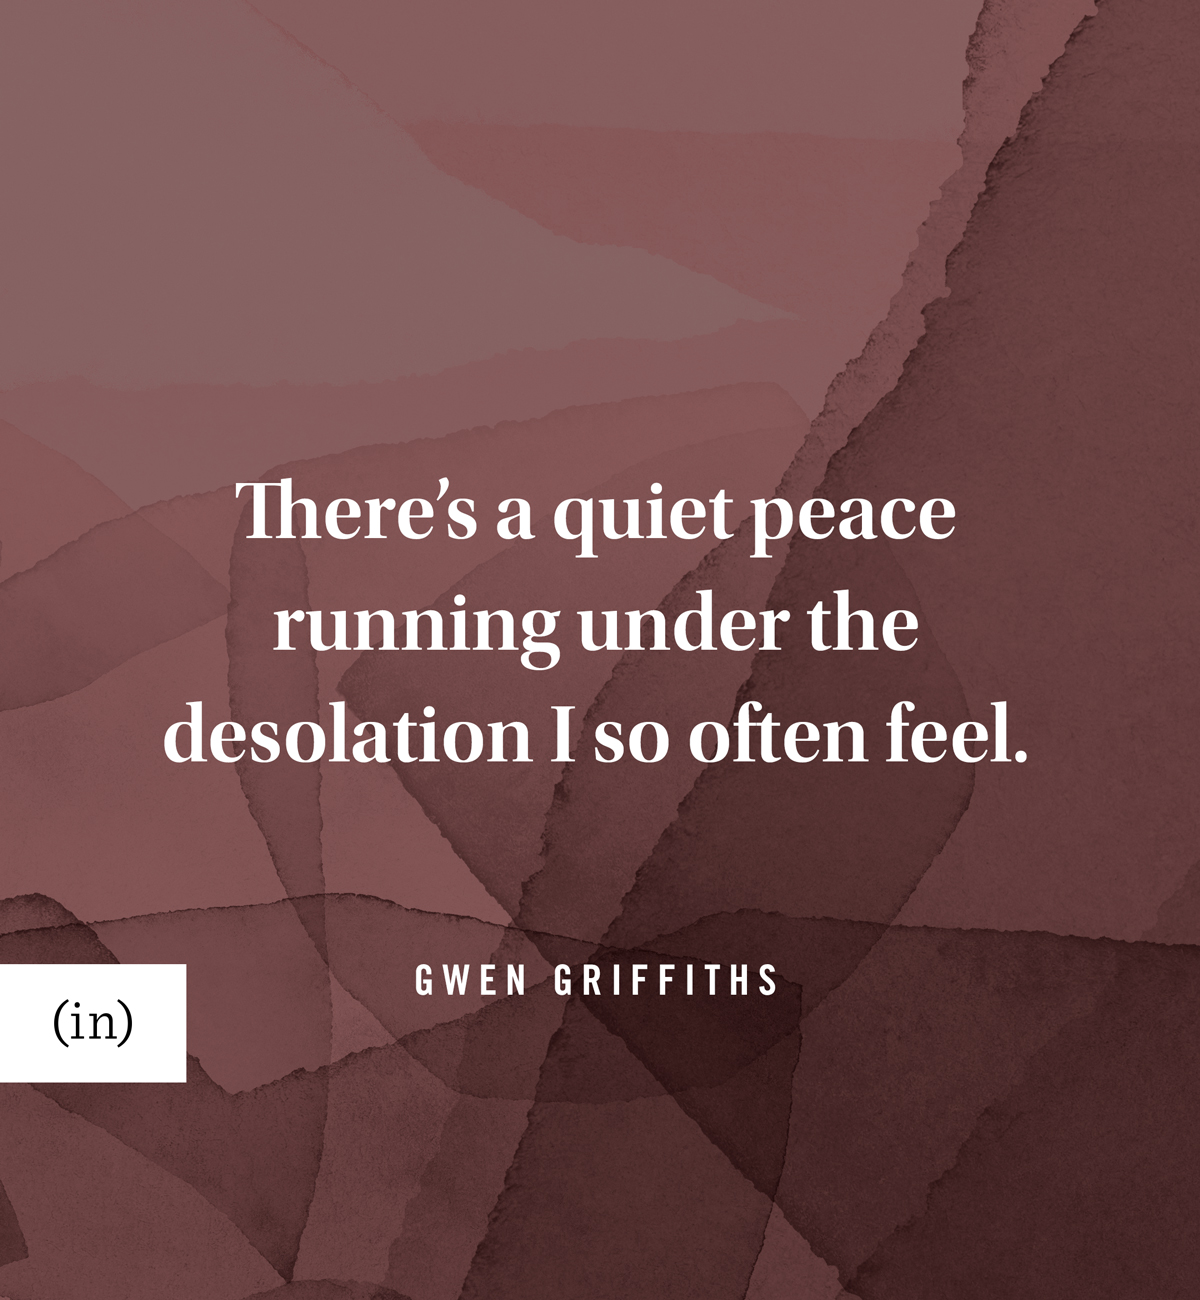 There’s a quiet peace running under the desolation I so often feel. -Gwen Griffiths